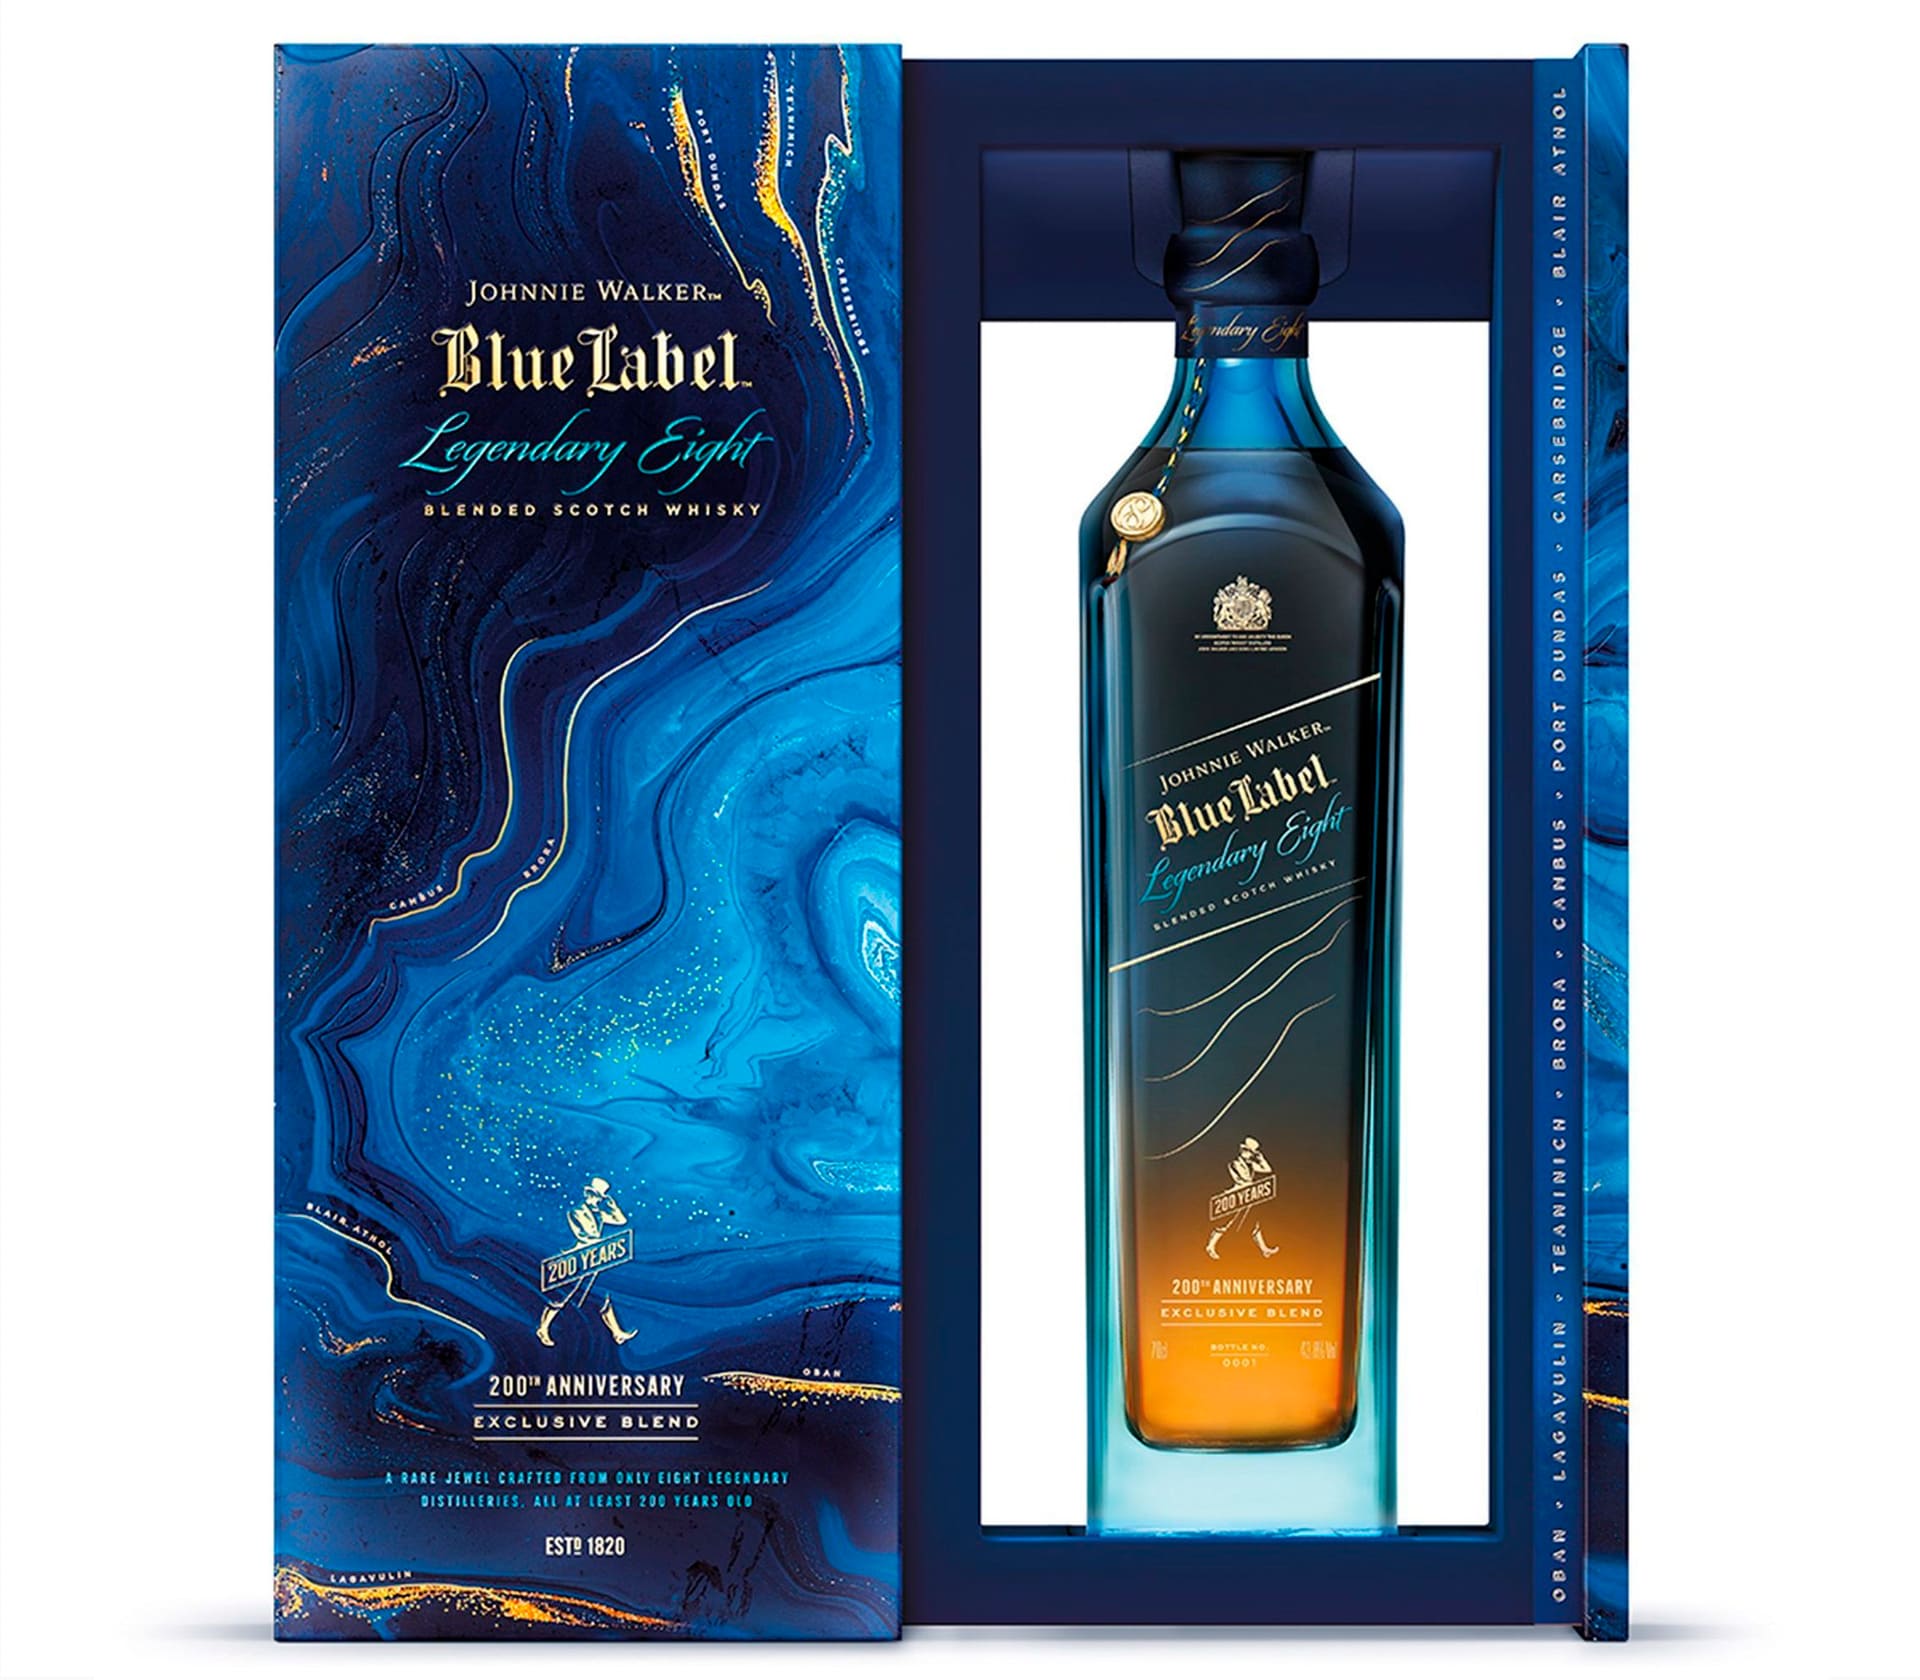 Blue Label Legendary Eight Exclusive Blend 200th Anniversary